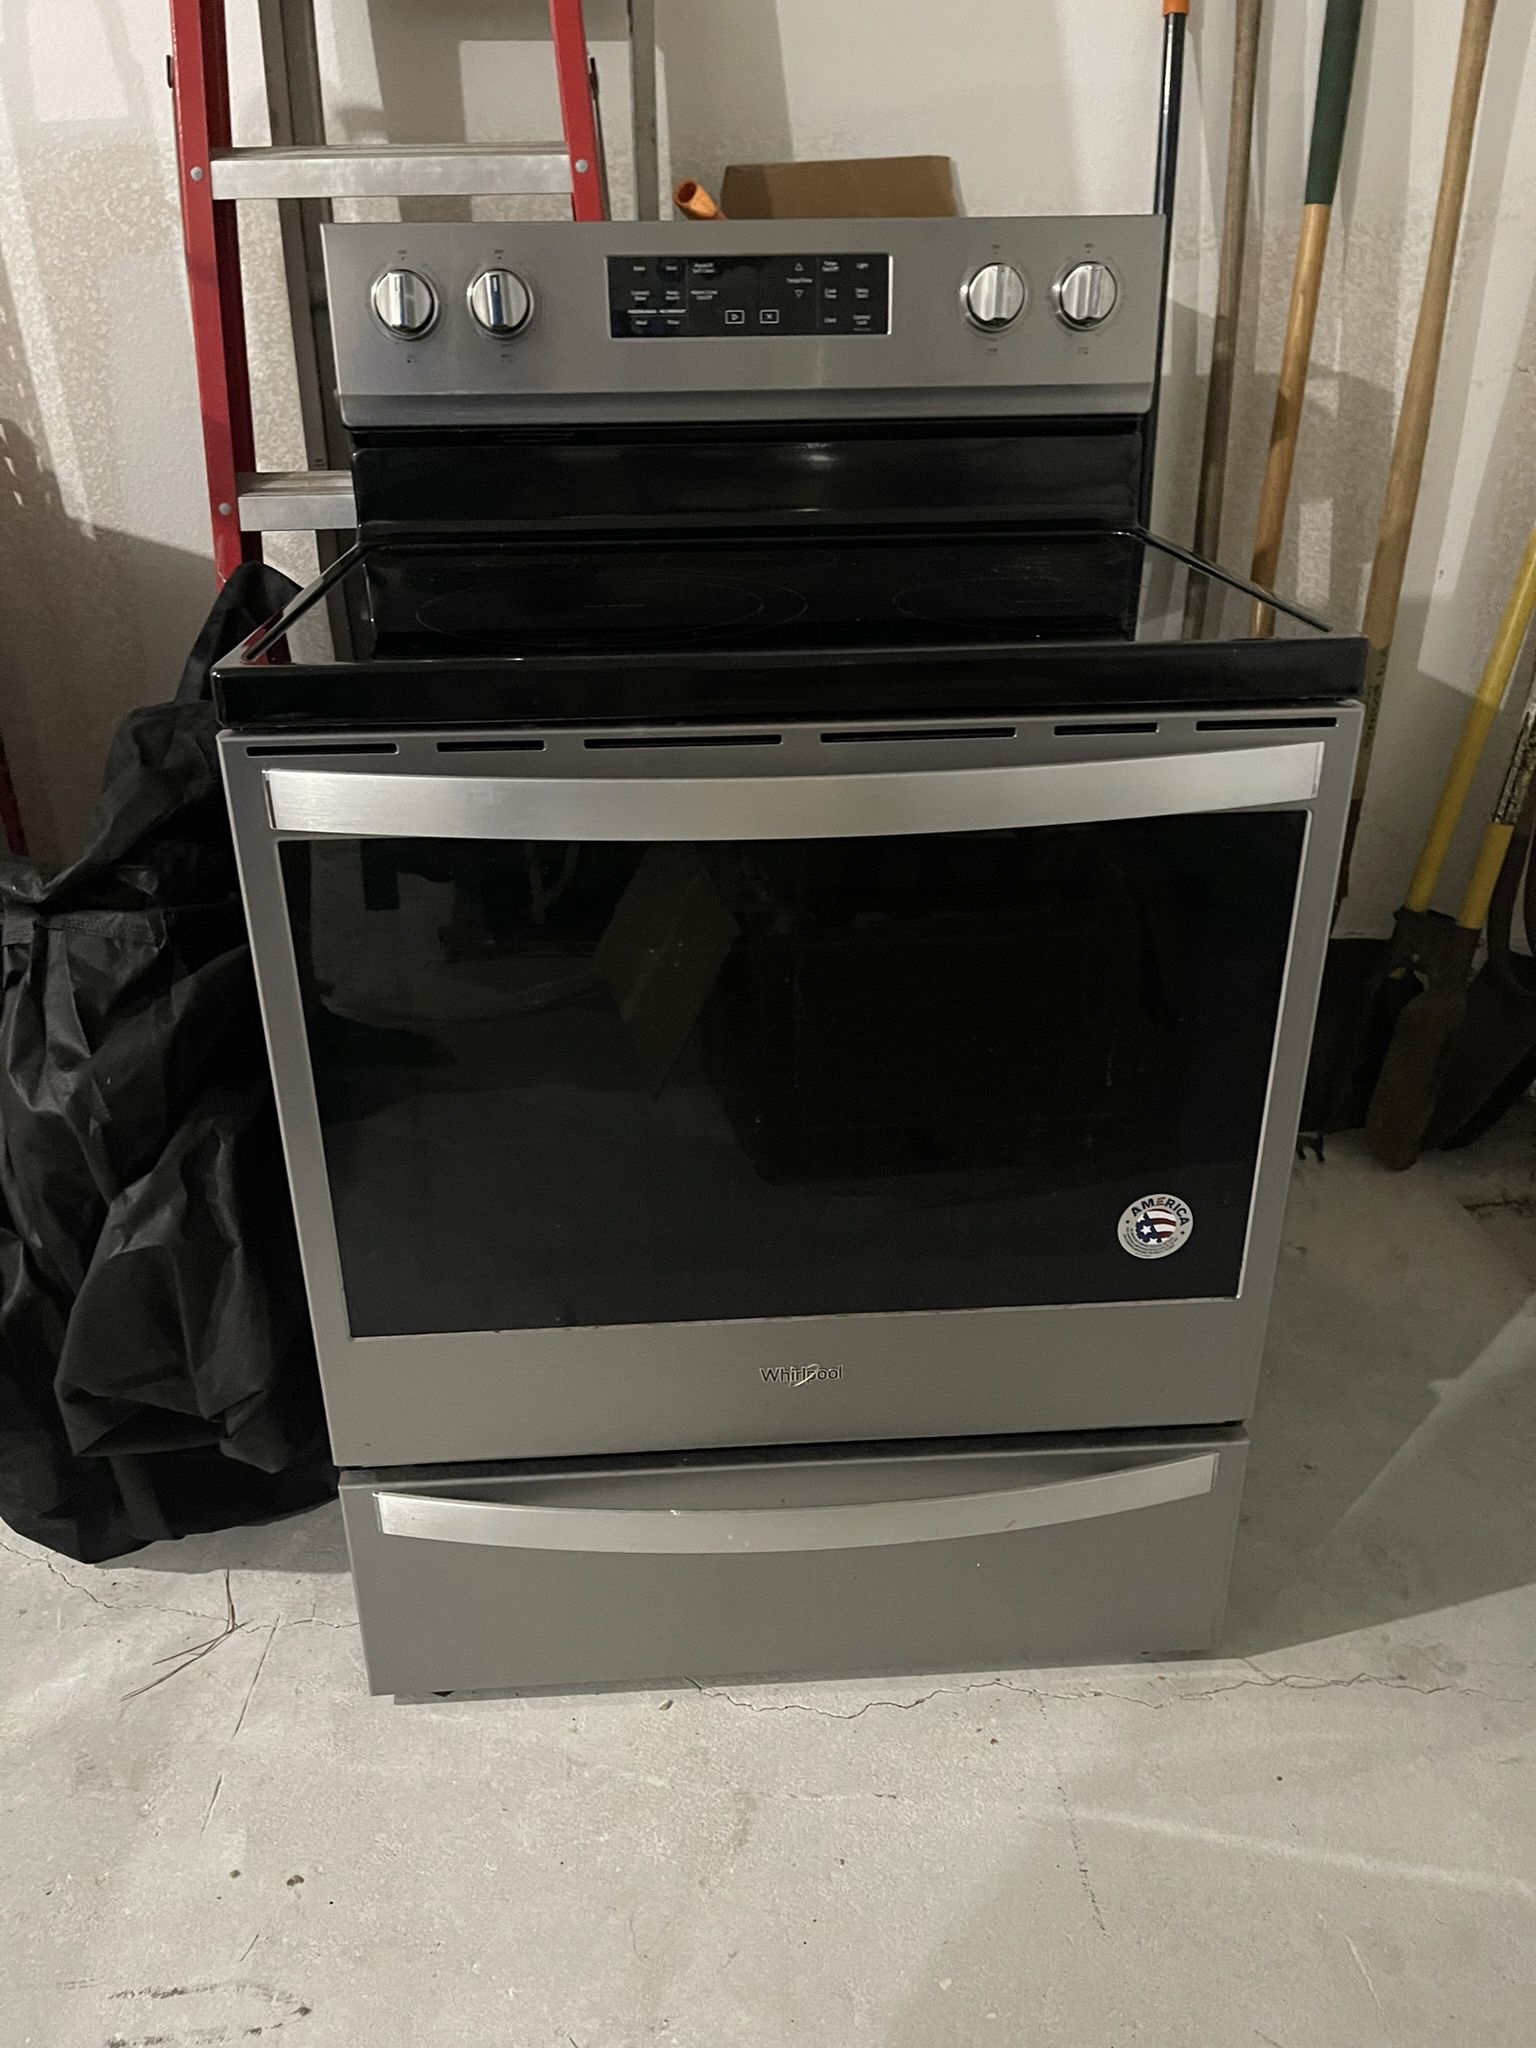 Whirlpool Oven, Dishwasher, Microwave